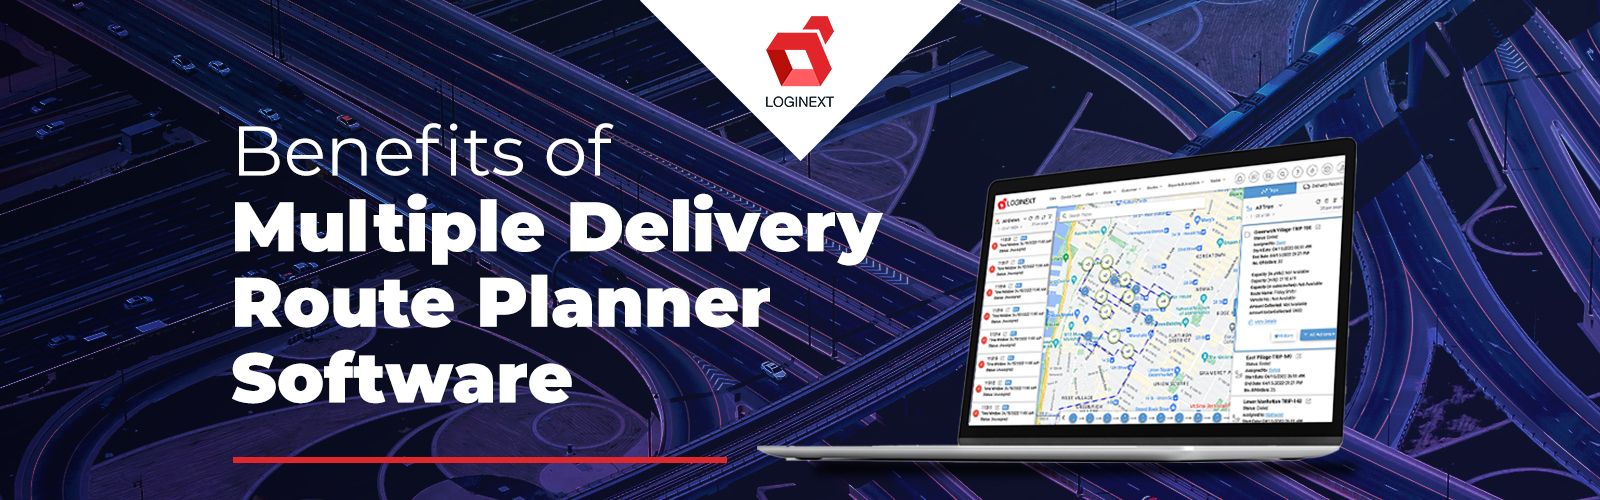 Benefits of Using Multiple Delivery Route Planner Software for Your Delivery Business